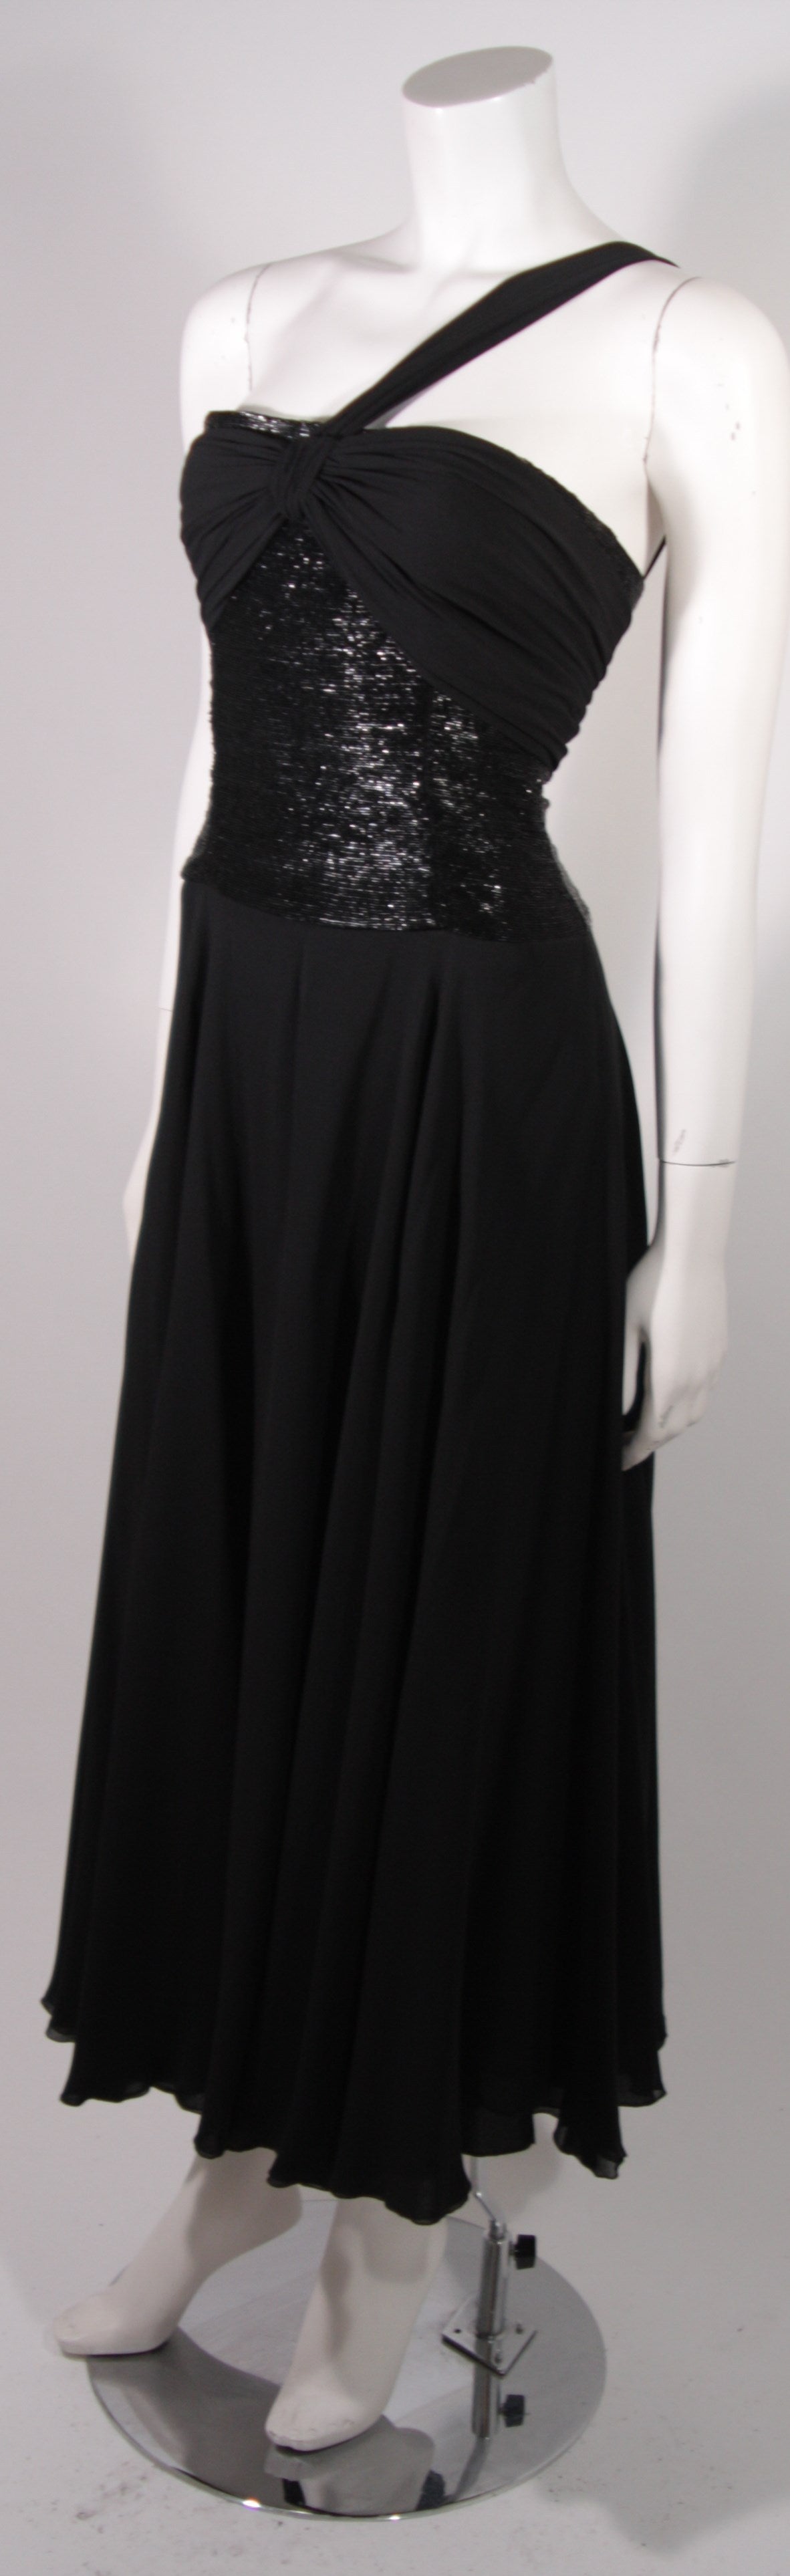 This is a Chloe design. The gown is composed of a black silk chiffon skirt featuring a  gorgeous beaded bodice. There is an asymmetrical chiffon drape across the shoulder and chiffon at the bust. Center back zipper closure. 

Measures